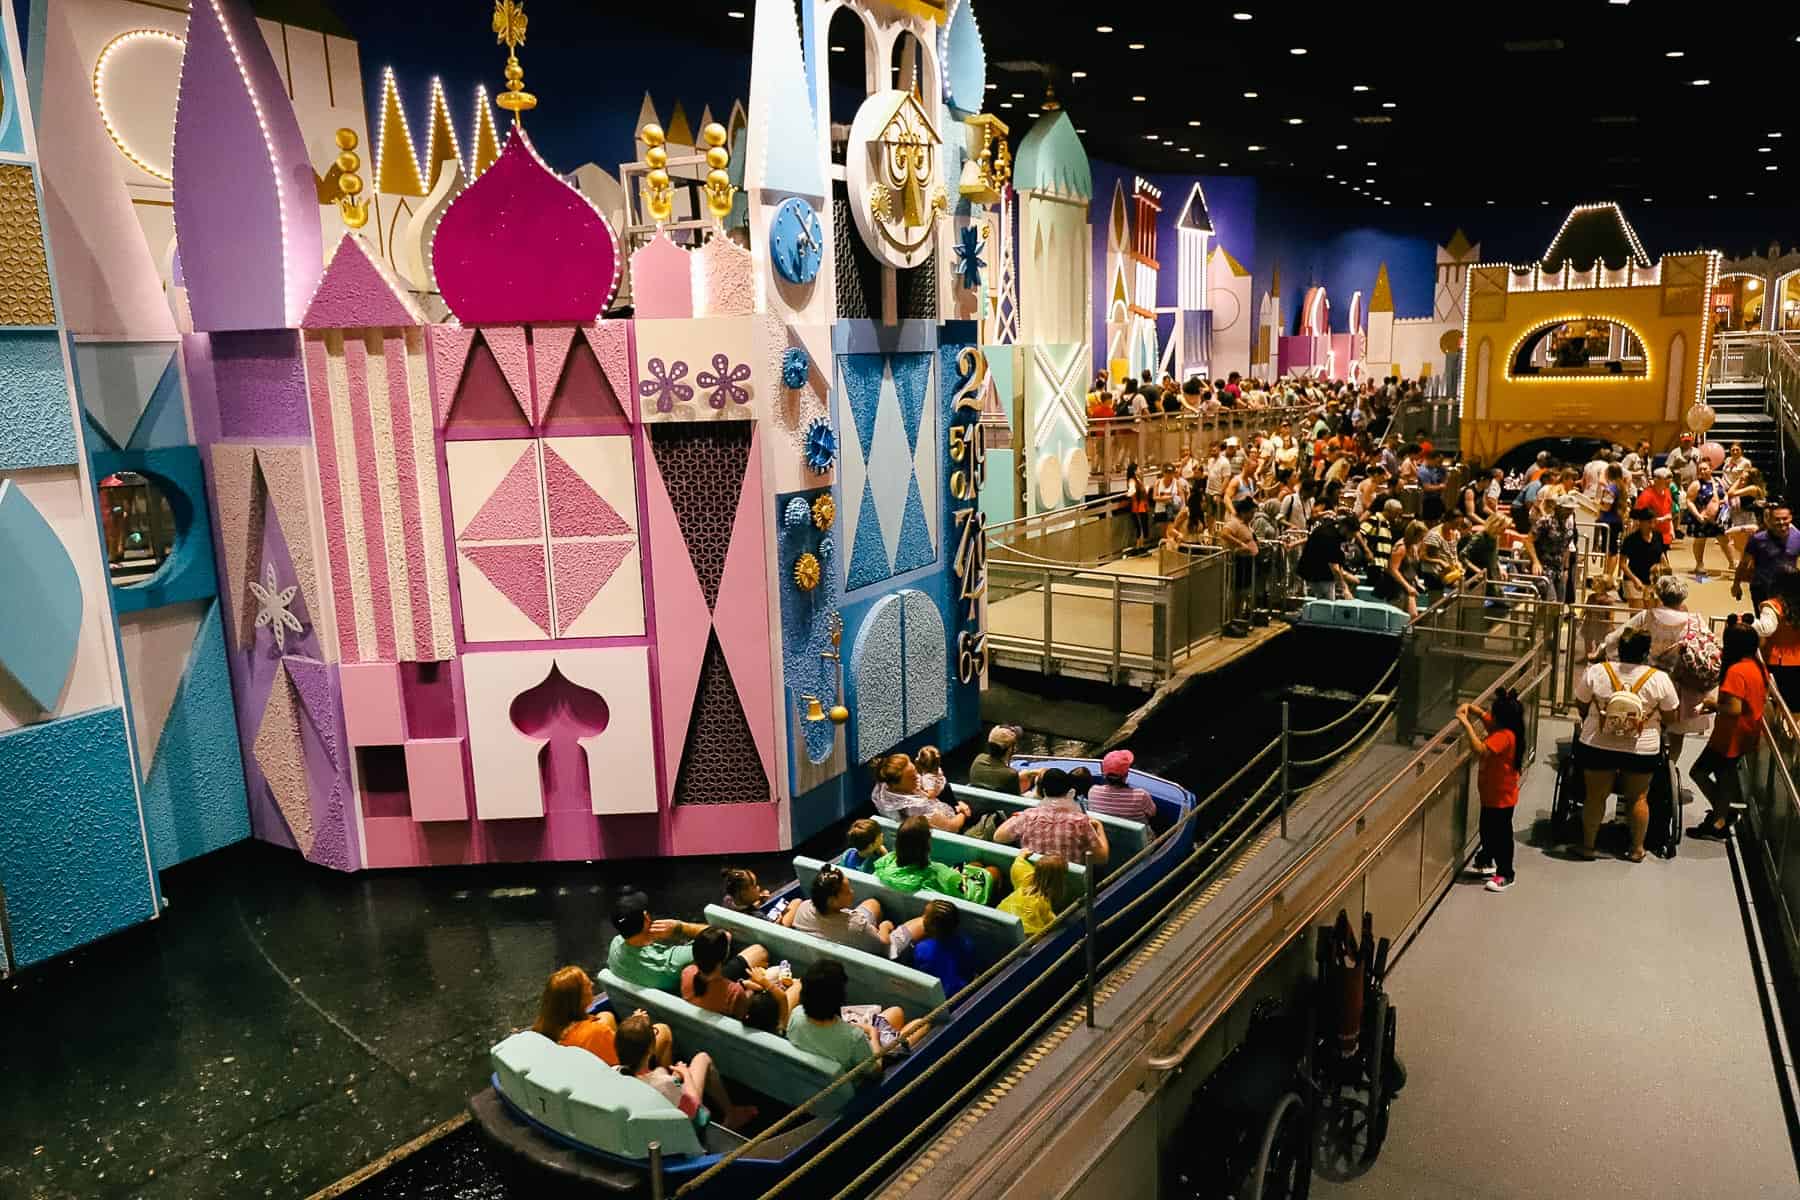 guests waiting to load and unload boats at "it's a small world"